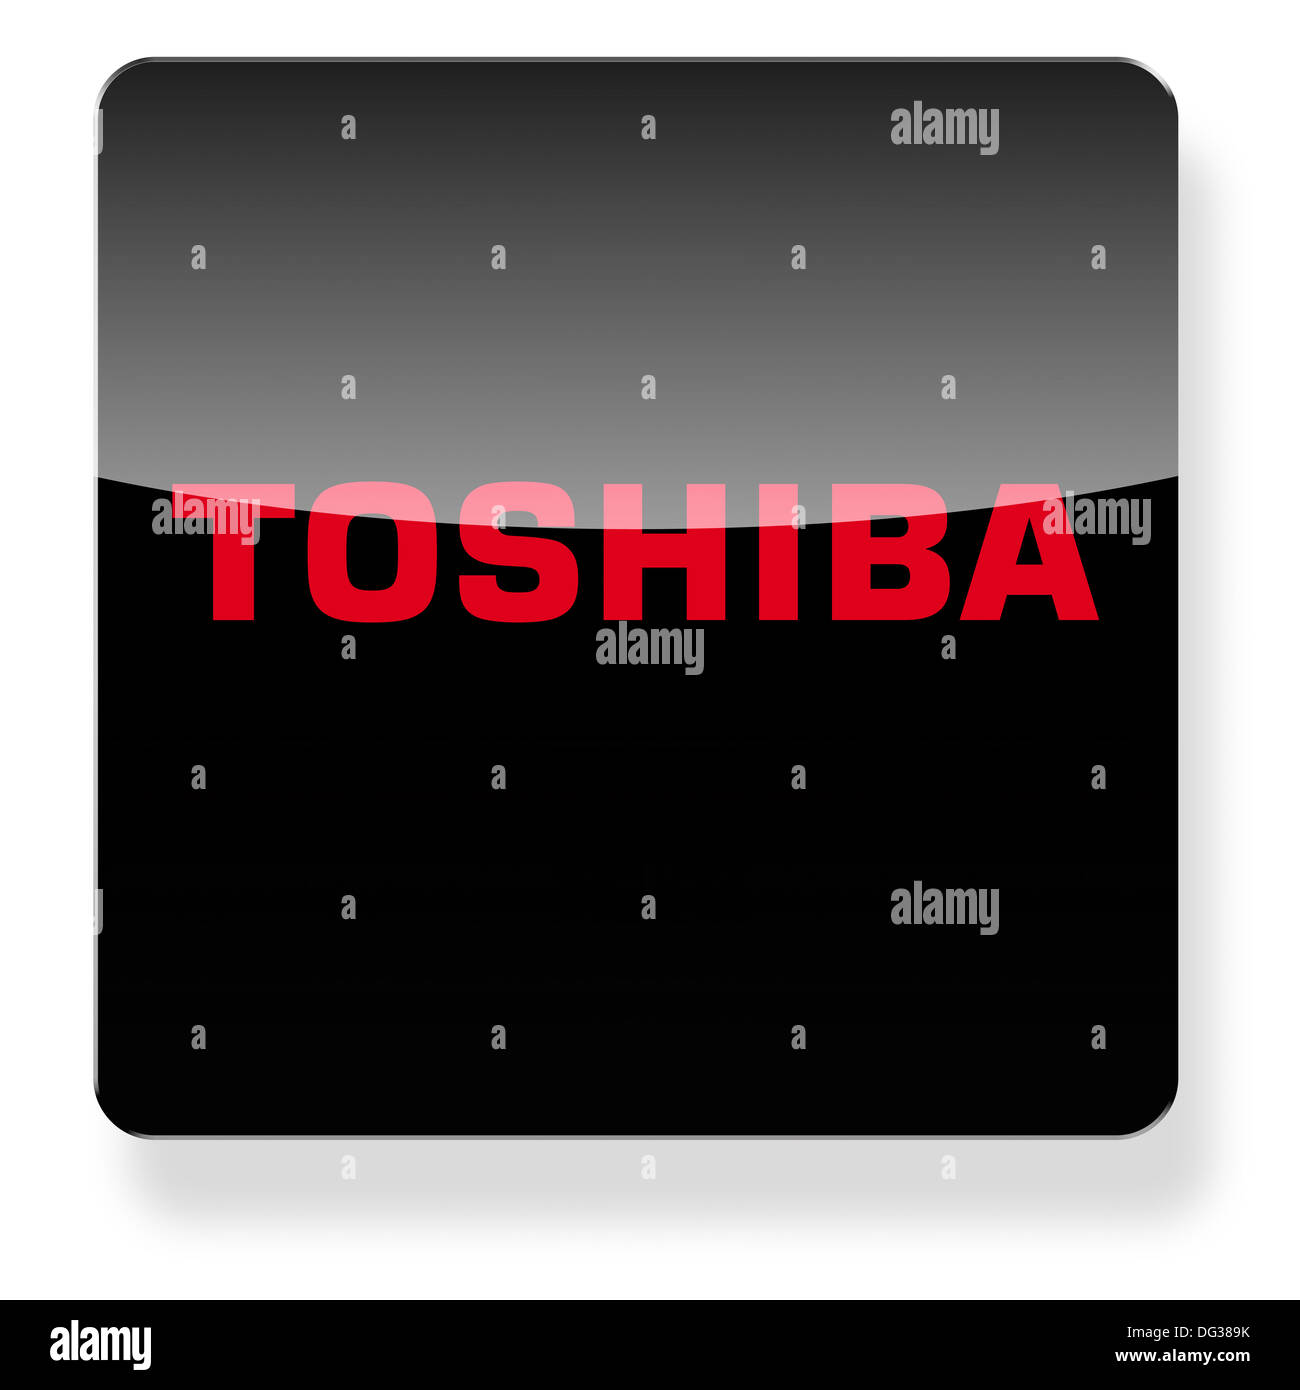 Toshiba logo as an app icon. Clipping path included. Stock Photo